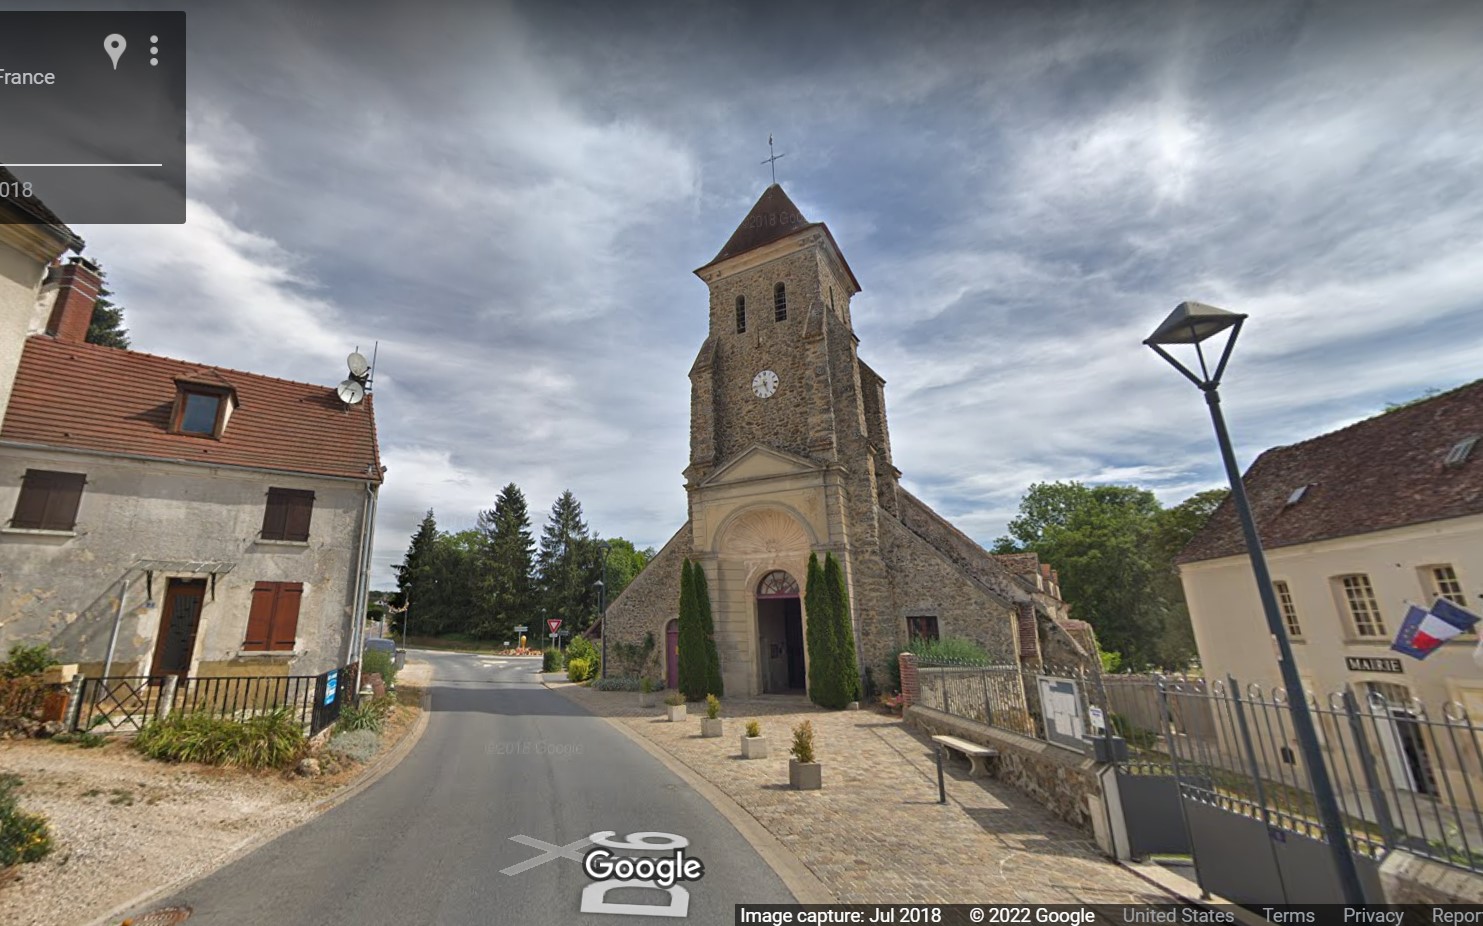 102nd Inf. Regt. / YD Update:  The Church at Bezu-le-Guery